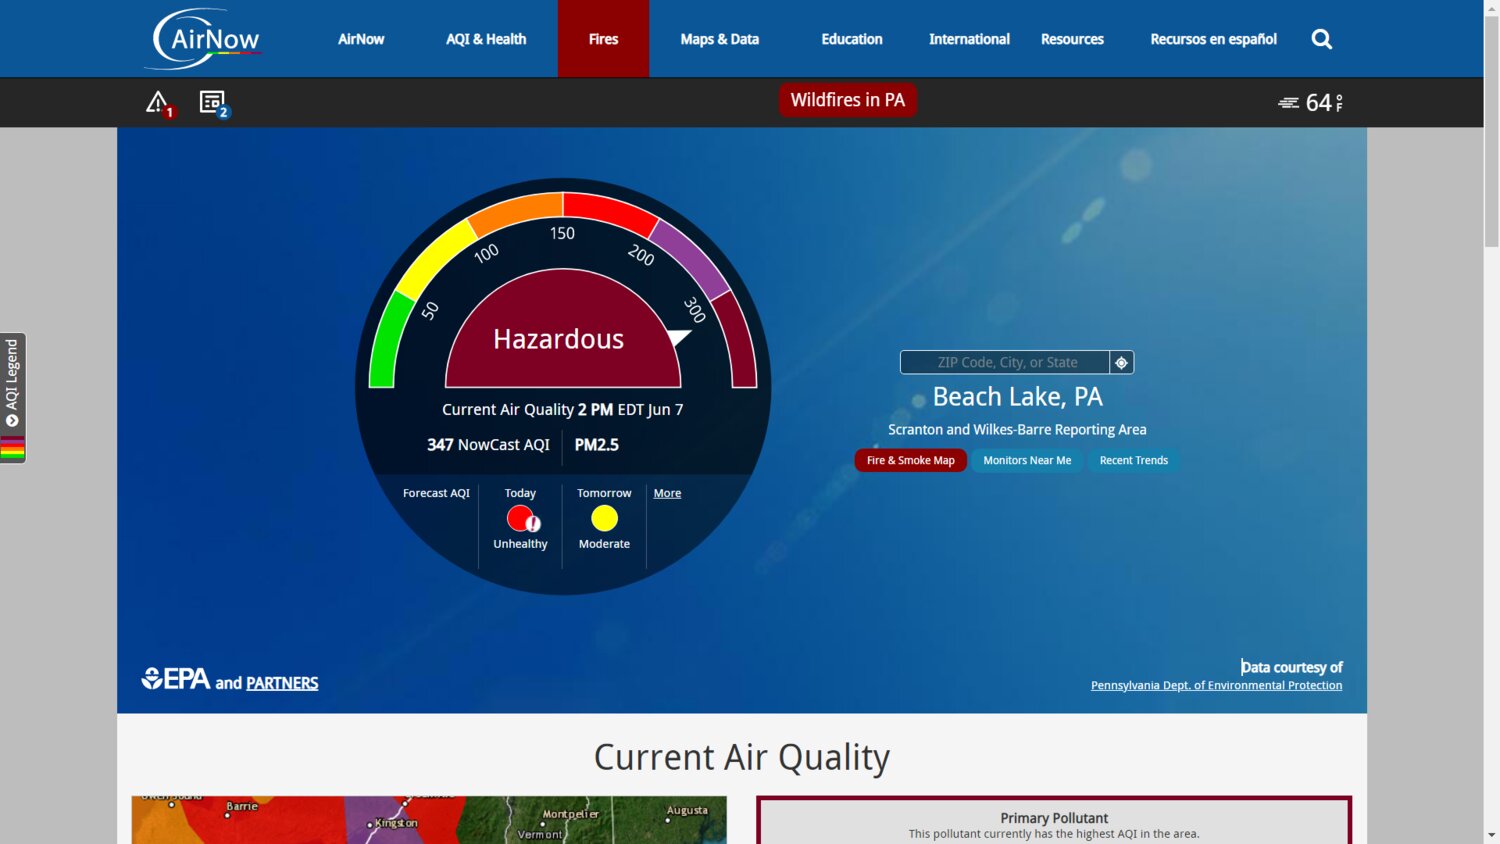 AirNow.gov is a handy online tool to measure the Air Quality Index in a specific zipcode.